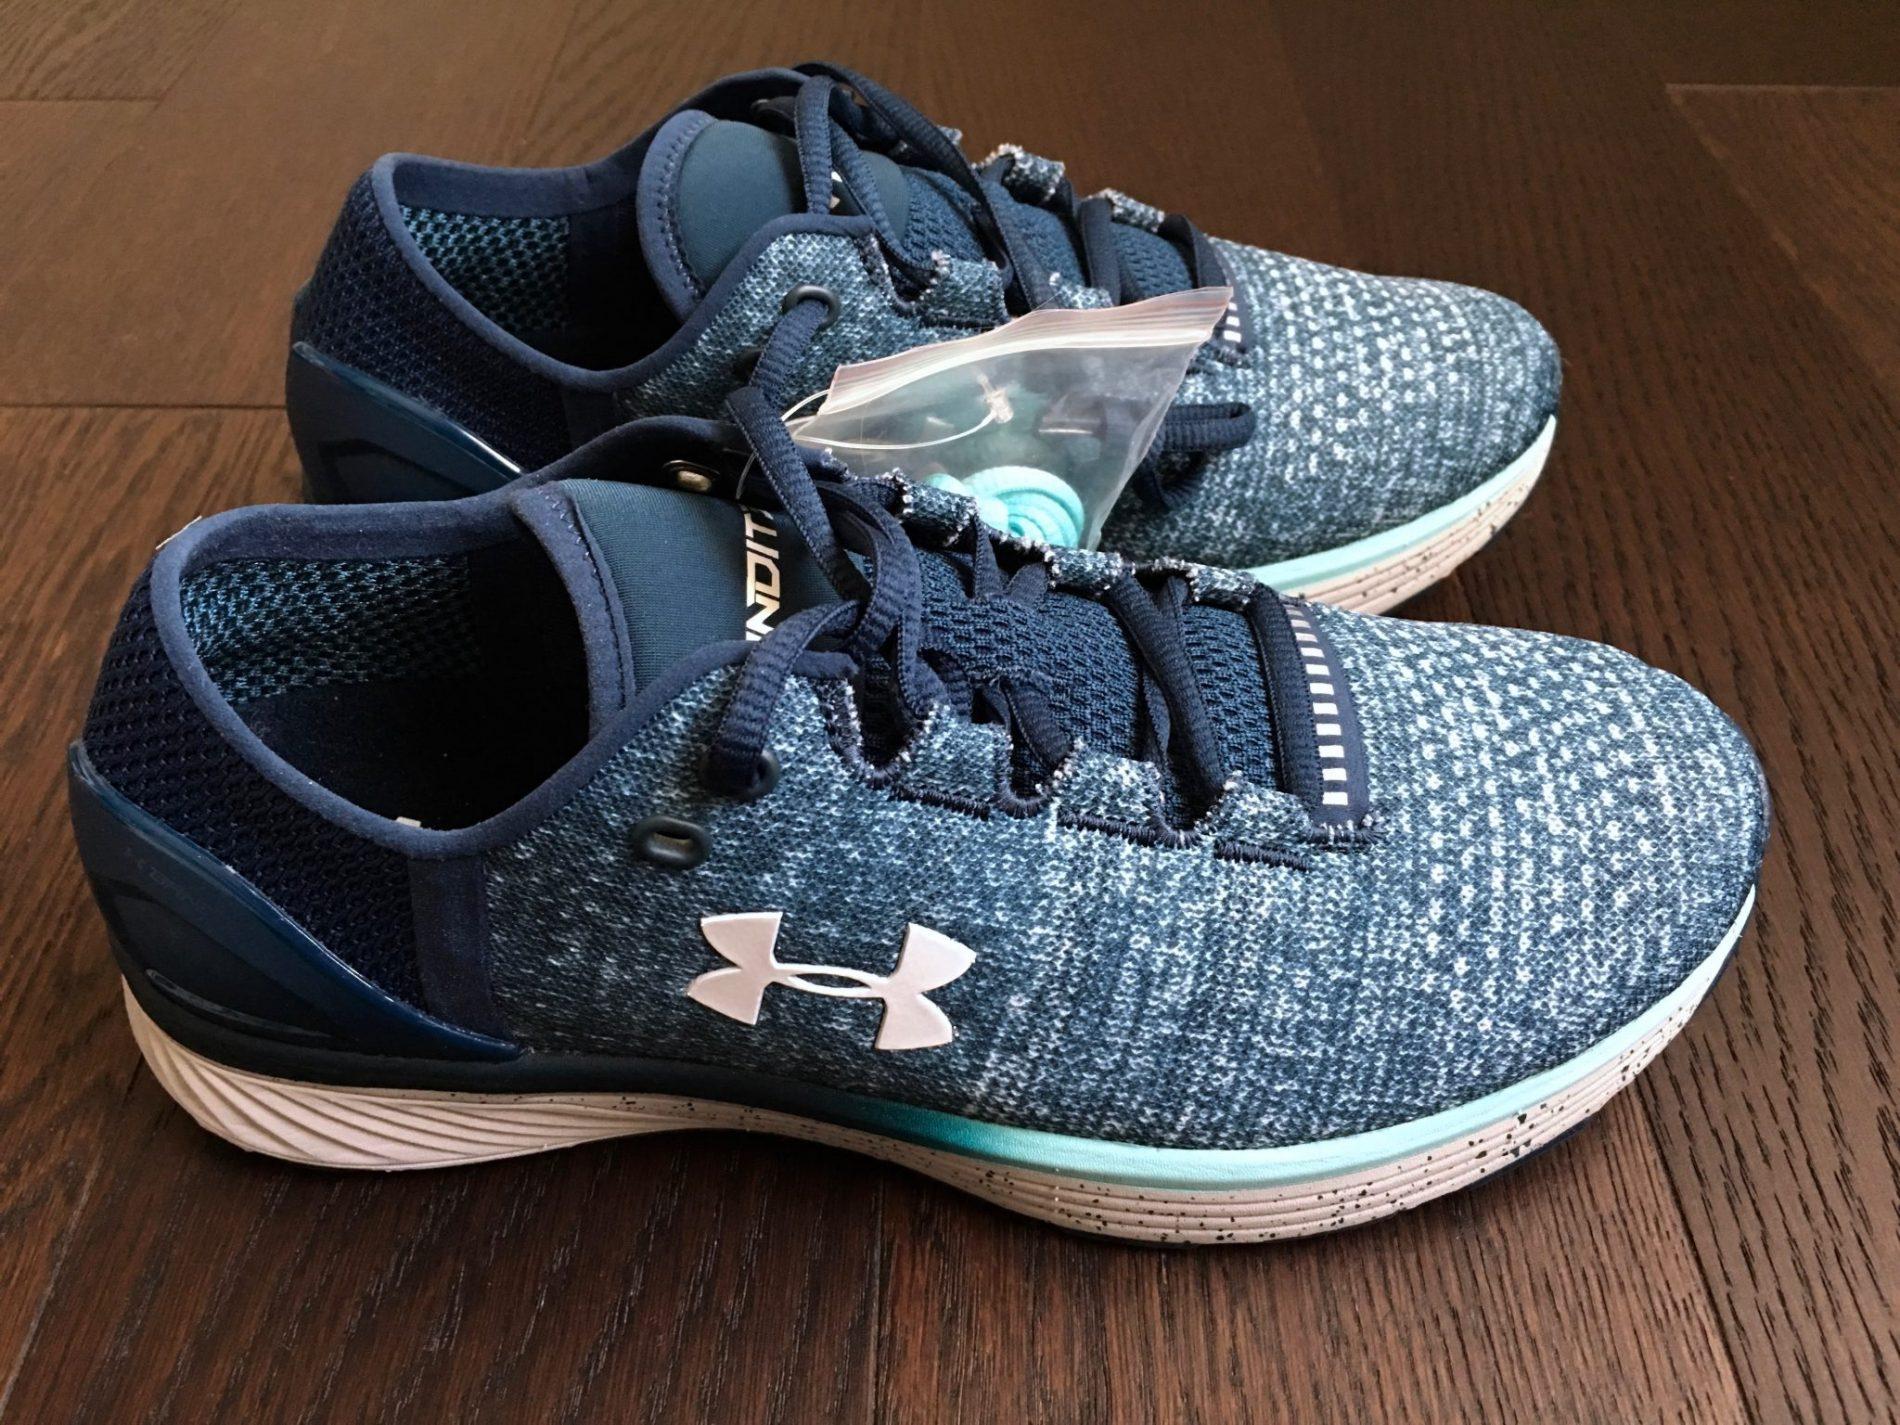 Under Armour ArmourBox Review - January 2018 - Subscription Box Ramblings